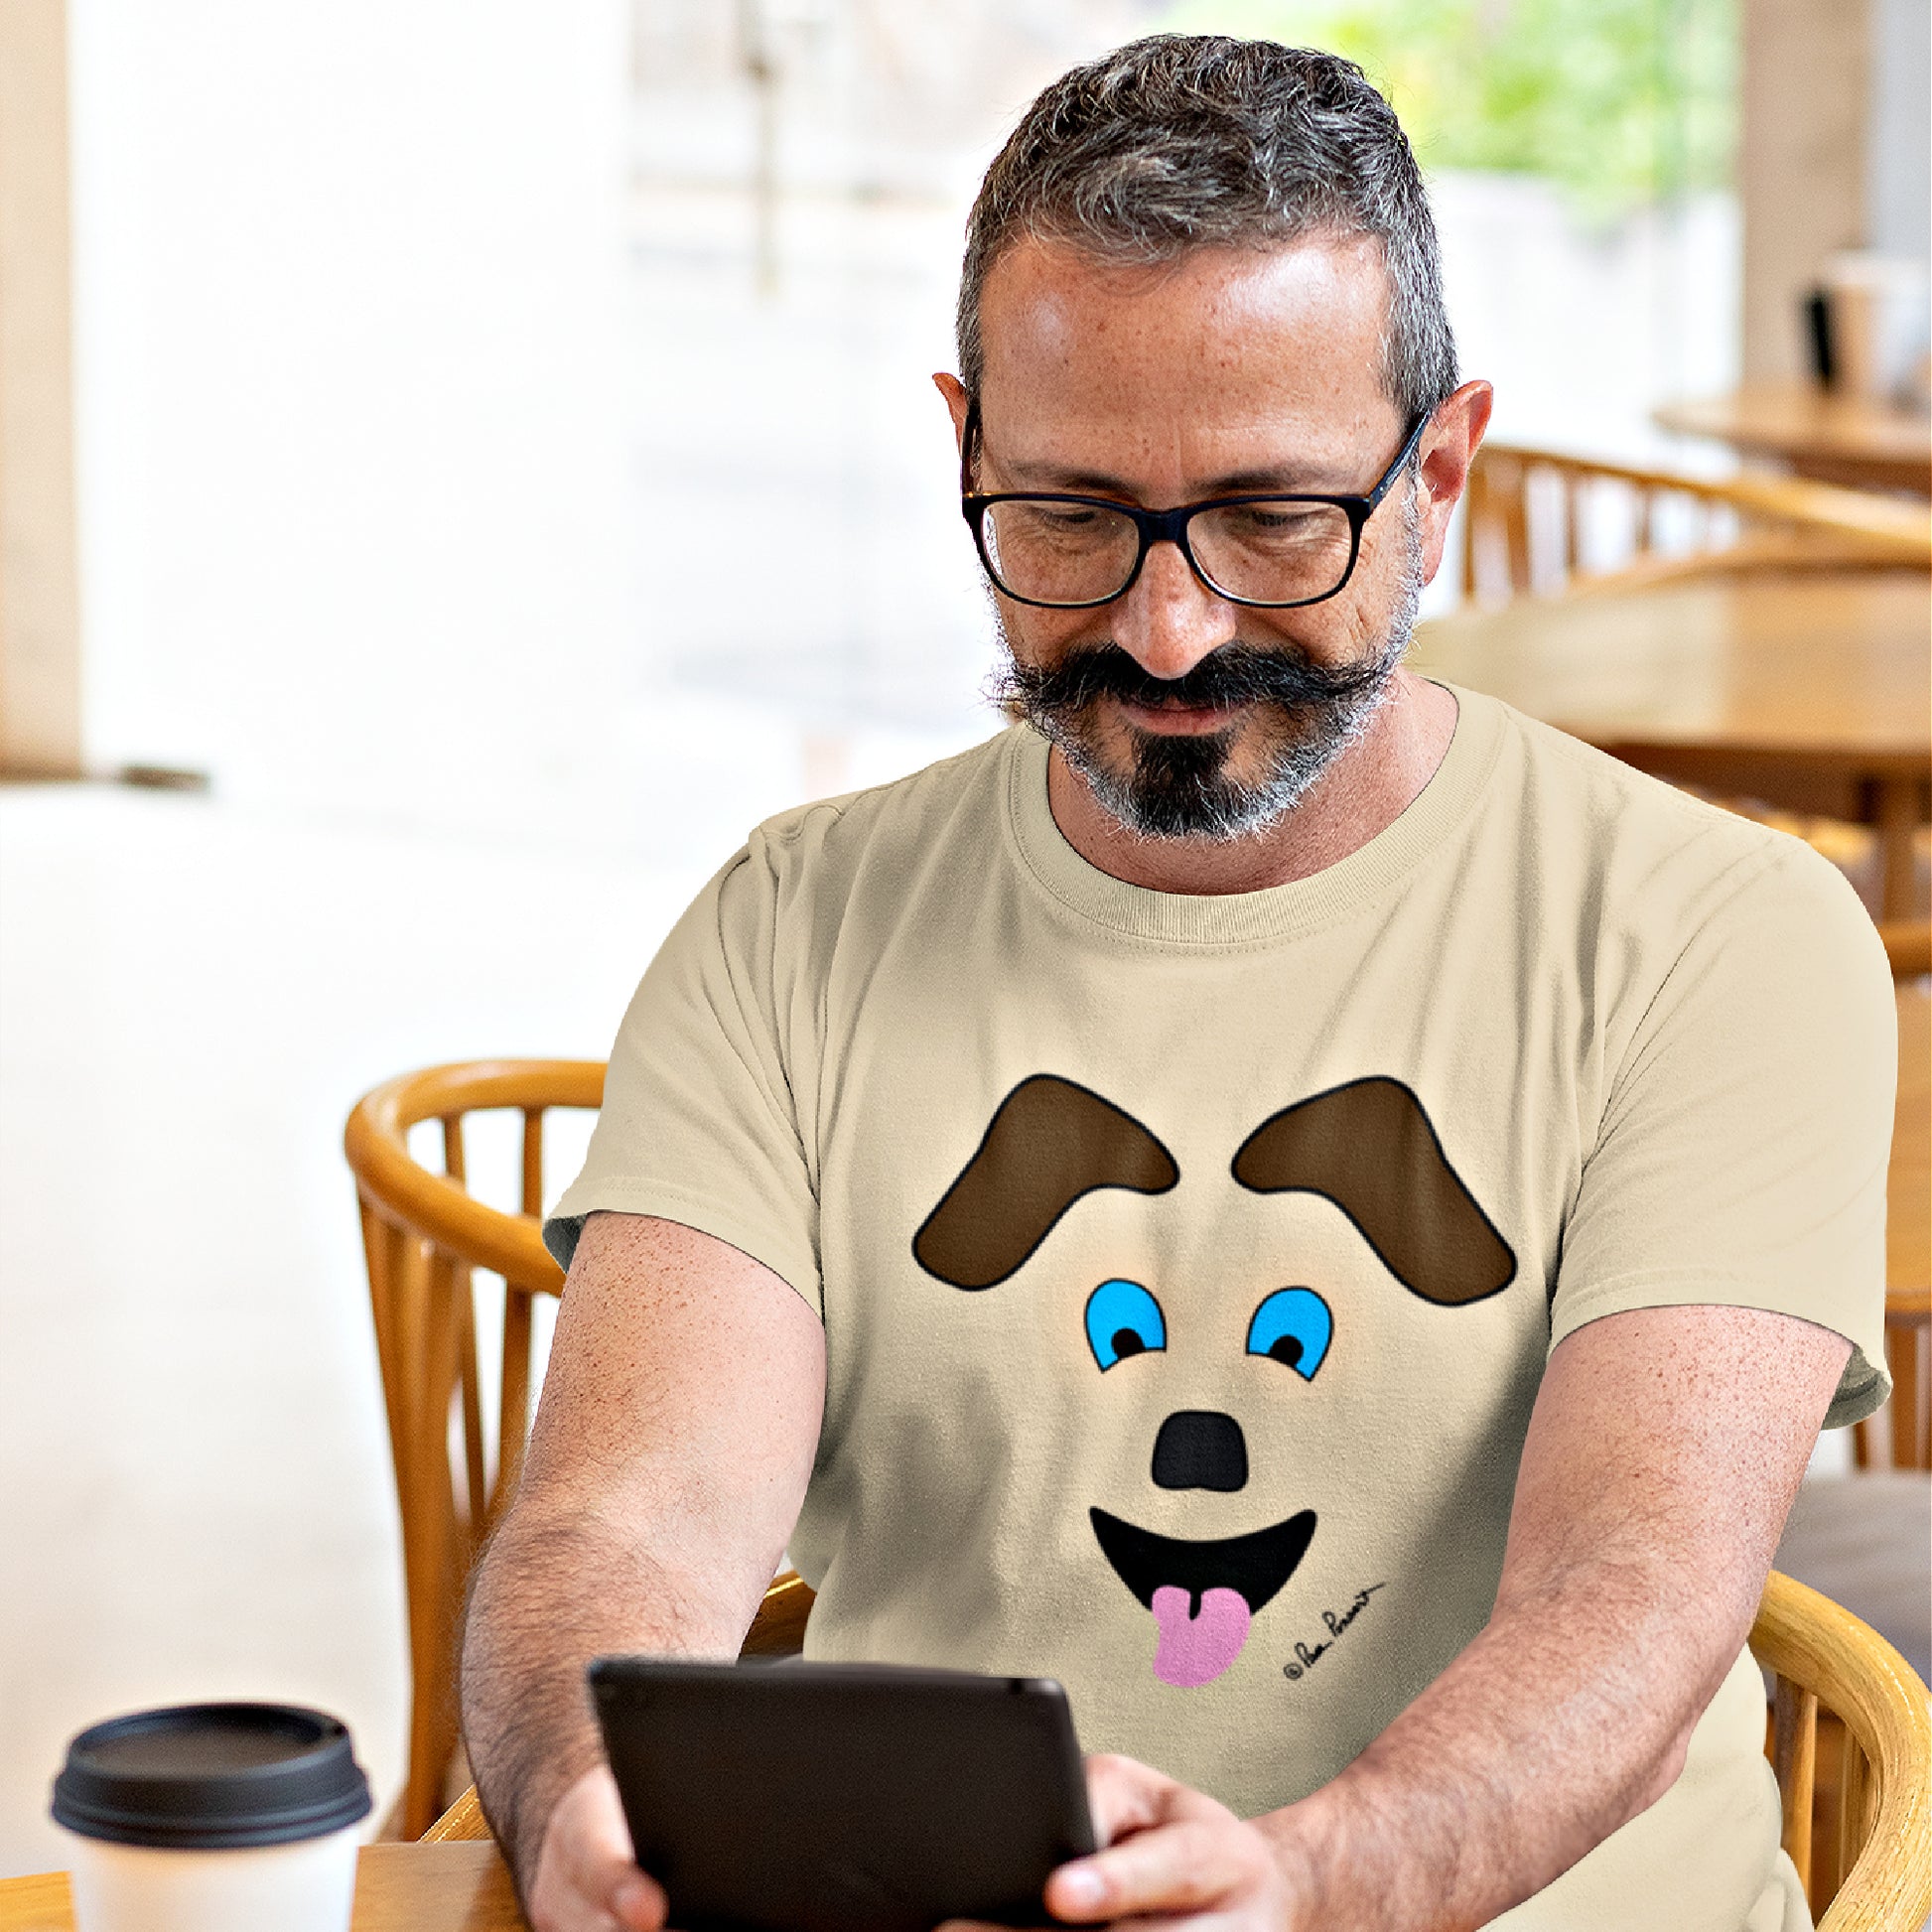 Mock up of a man reading his tablet in a café while wearing the Sand-colored t-shirt